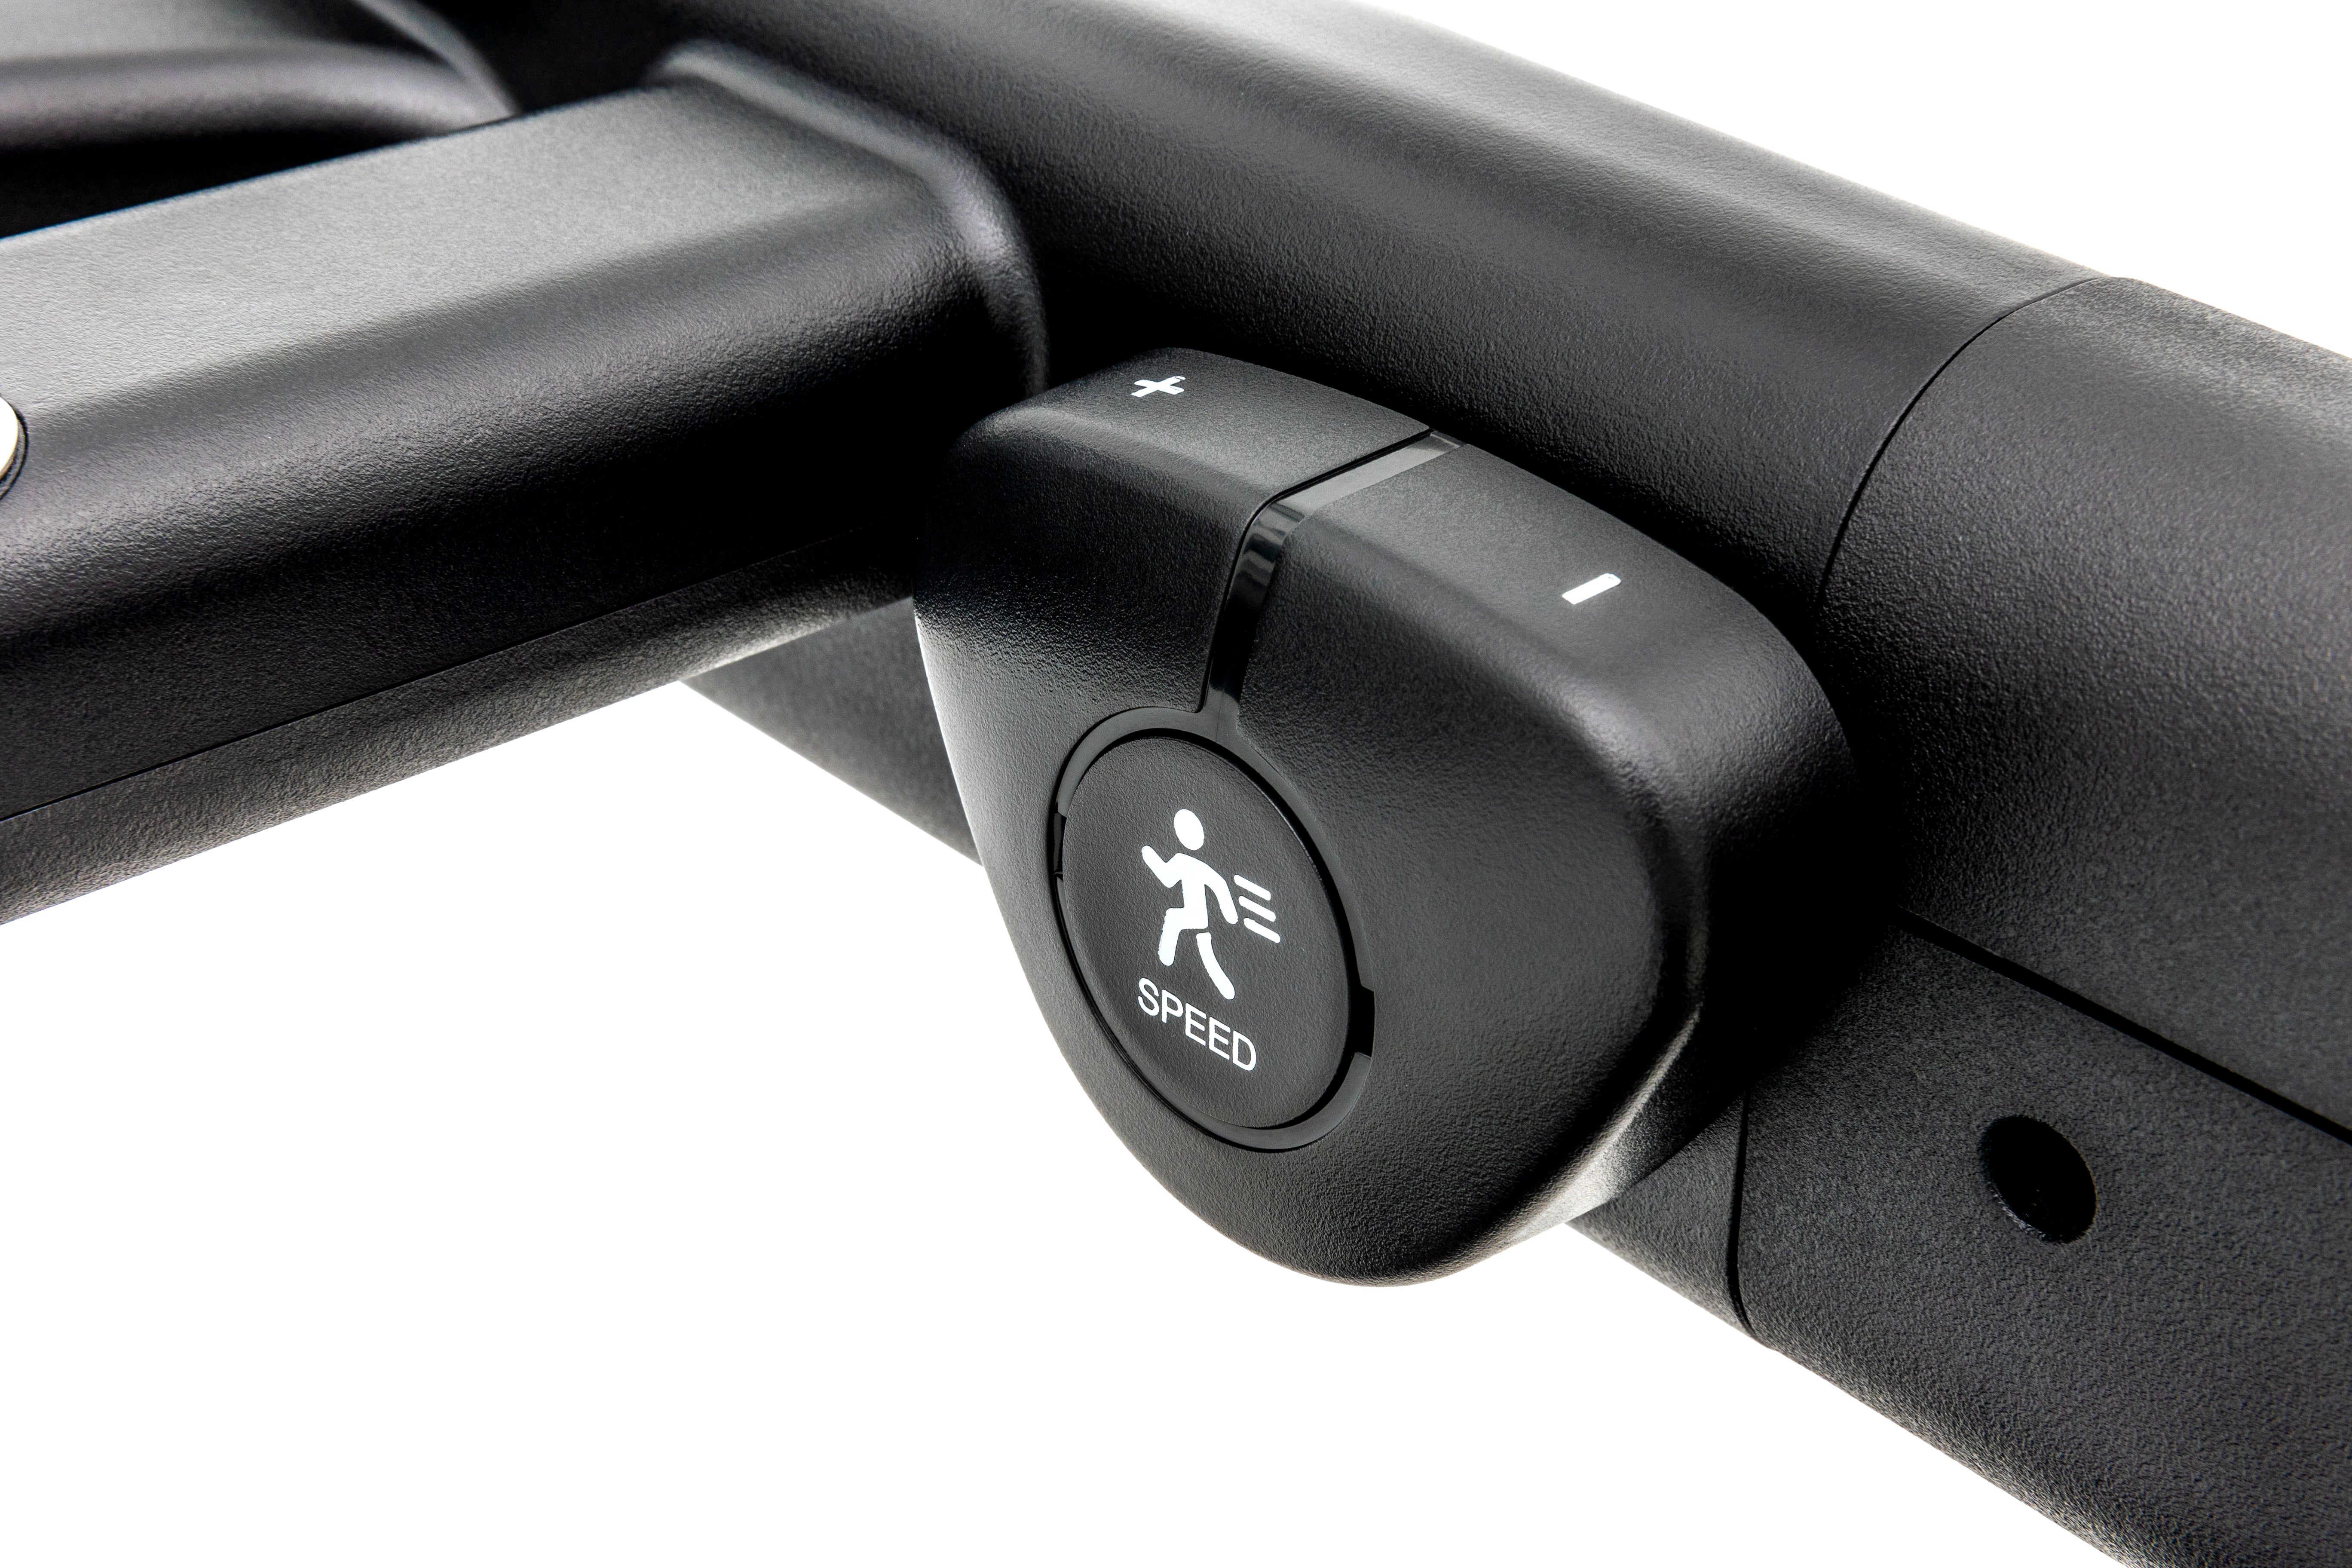 Close-up of the Sole ST90 treadmill's handlebar showcasing the "SPEED" adjustment button with a runner icon and plus-minus controls.